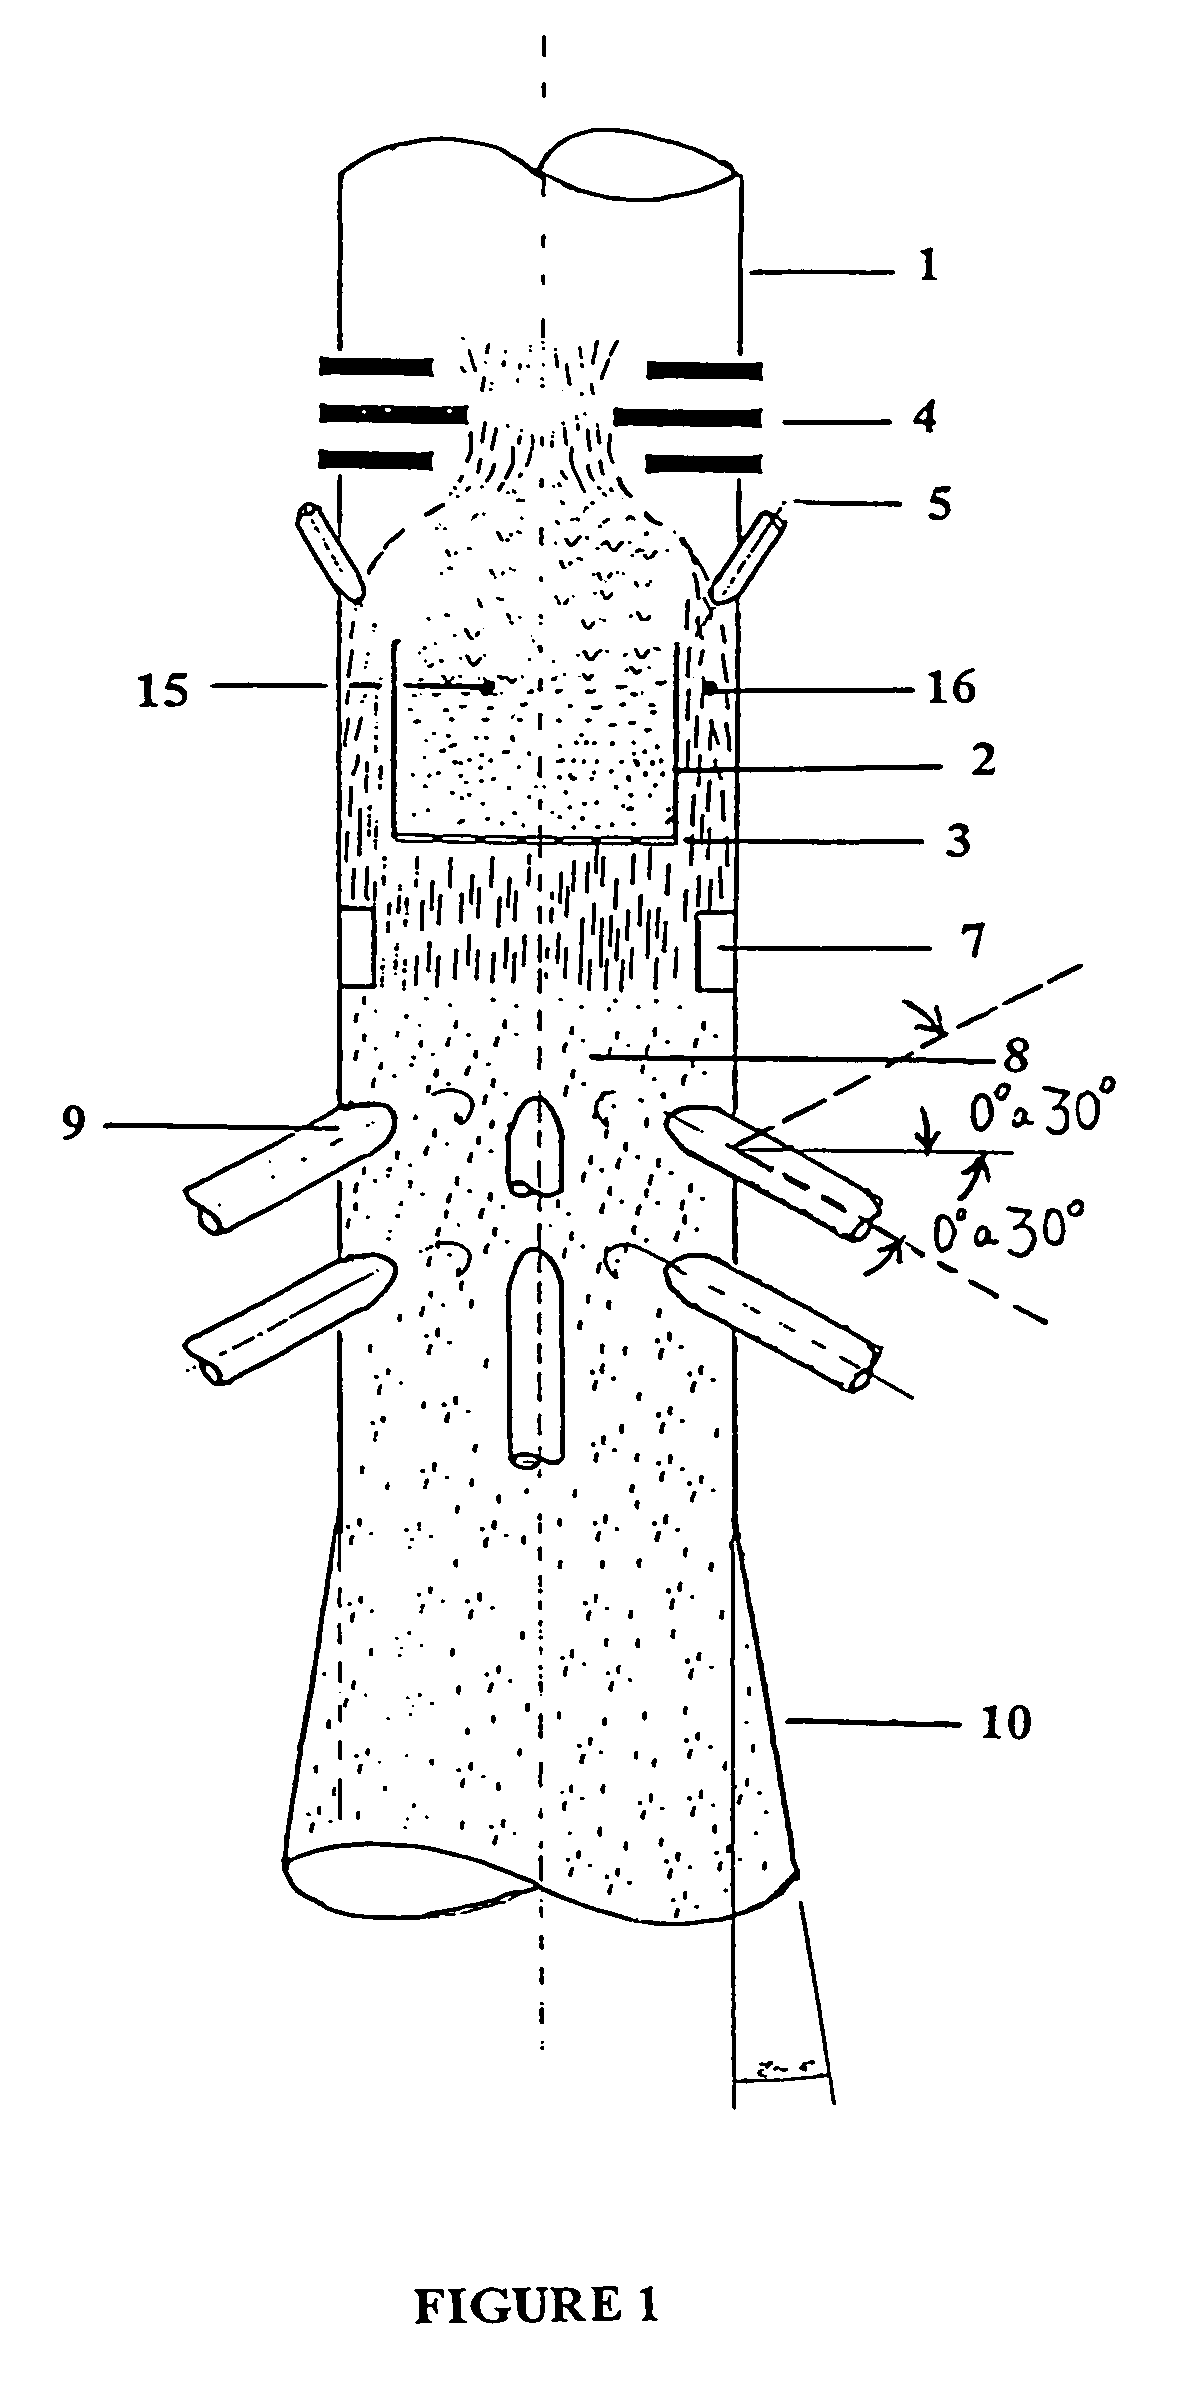 Multifunctional entry device for a downward flow tube reactor